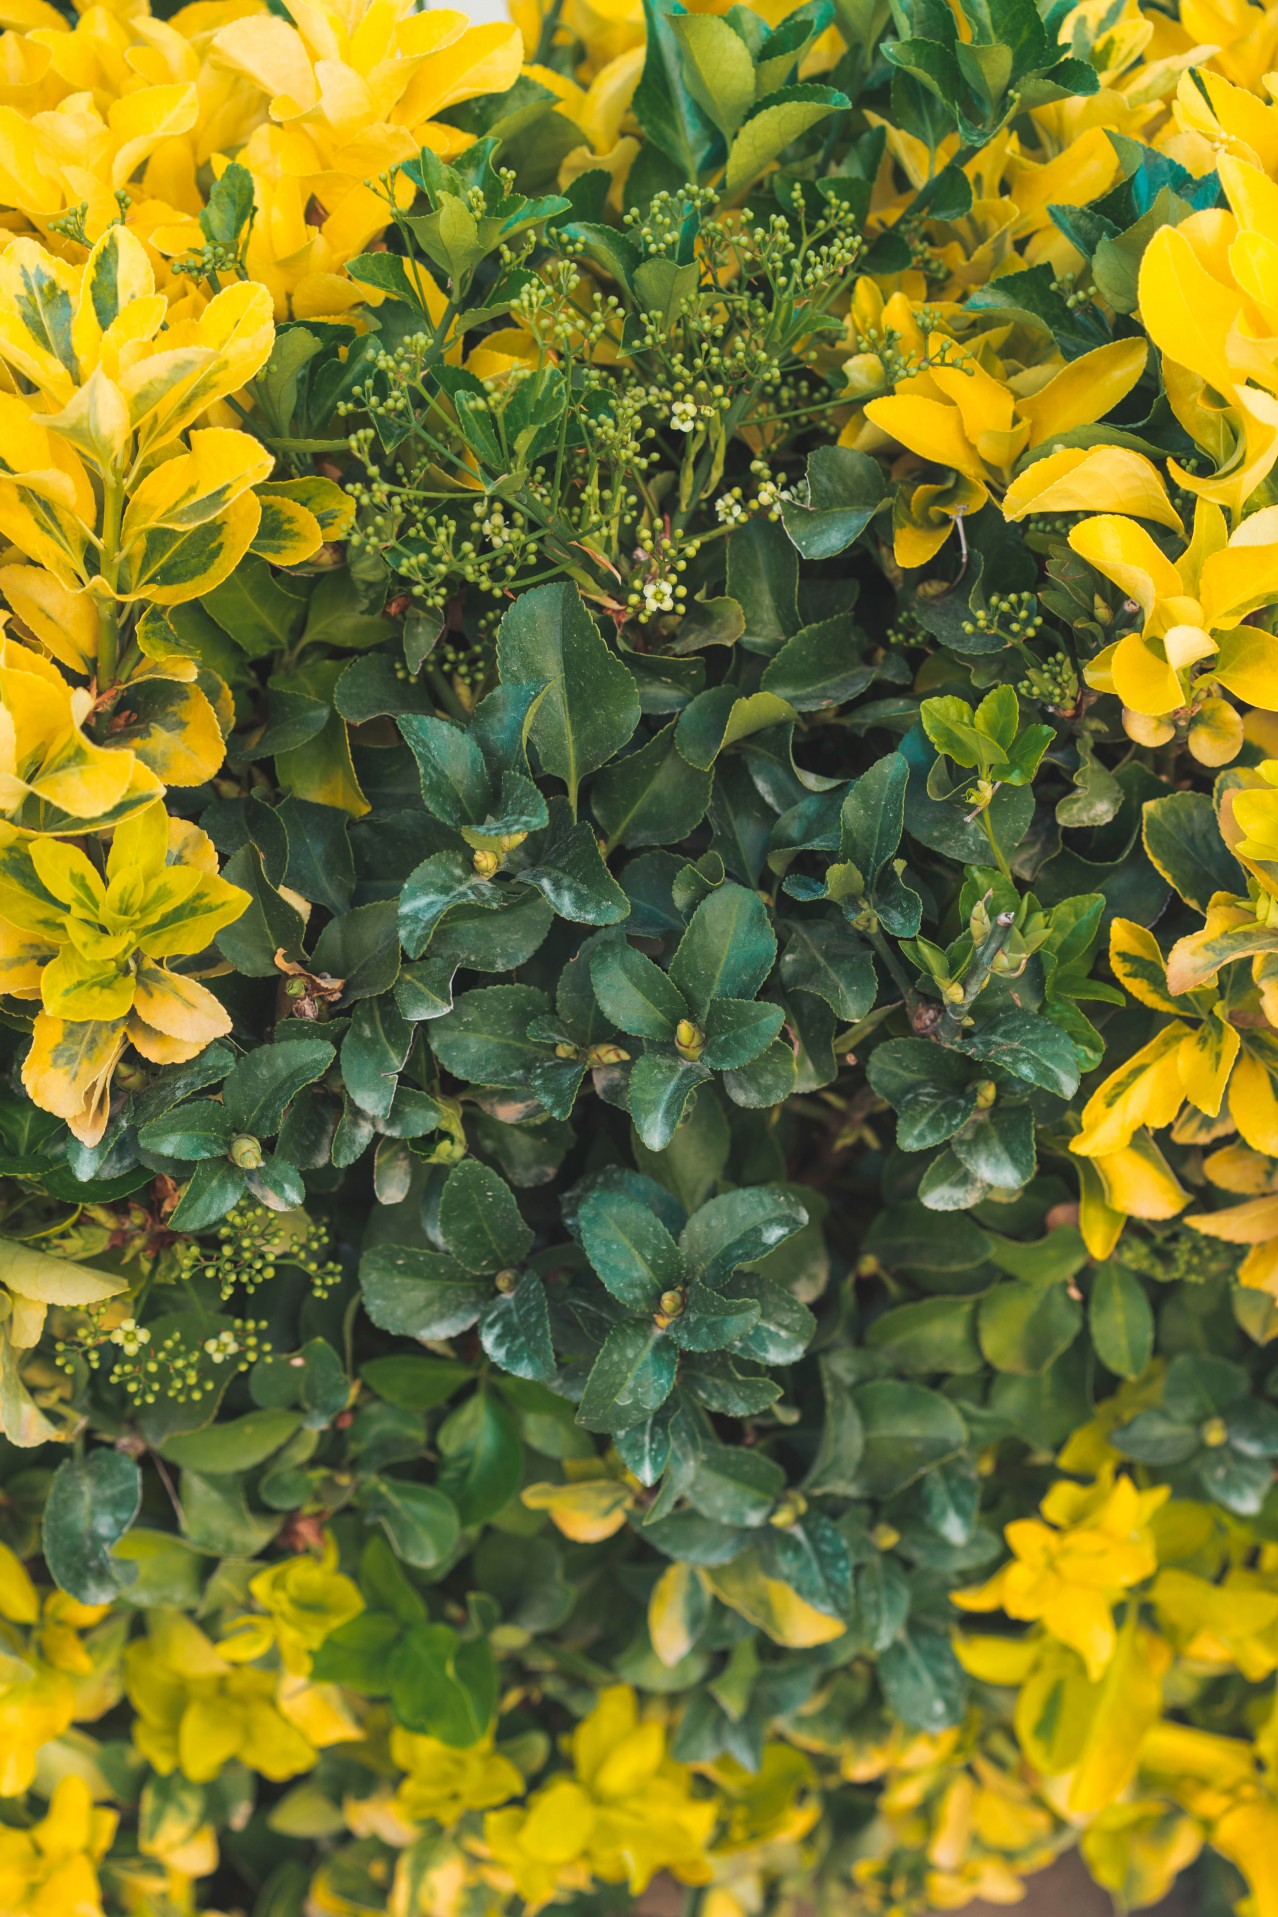 Green and yellow plants texture